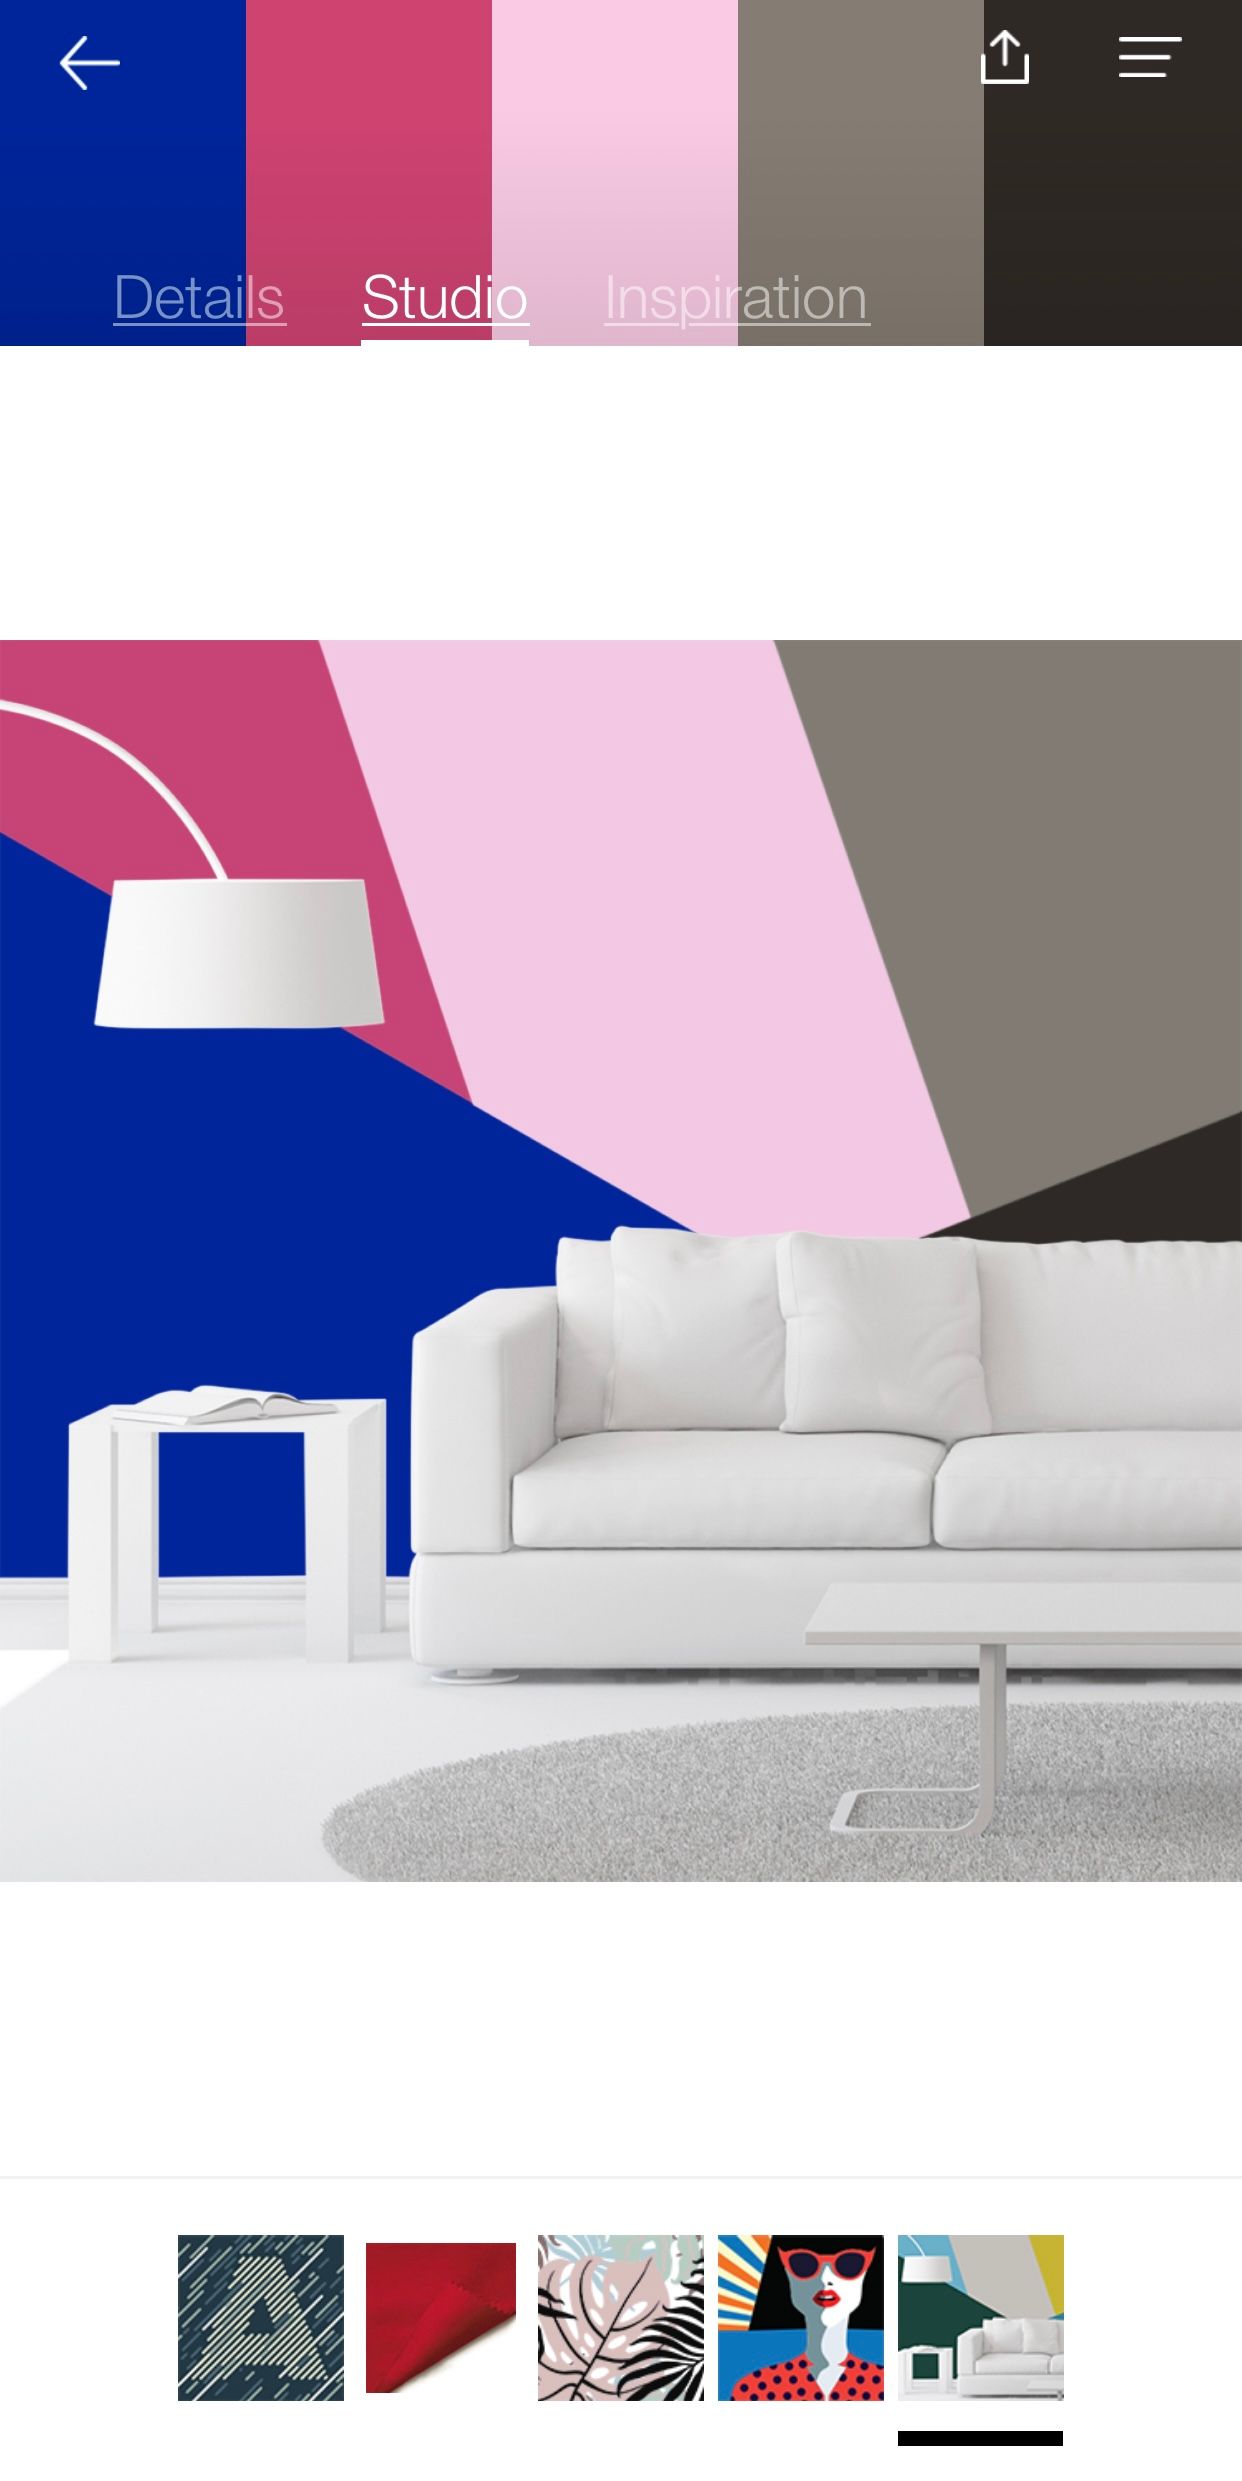 Blue, pink, and grey living room walls with white floors, couch, side table, and lamp